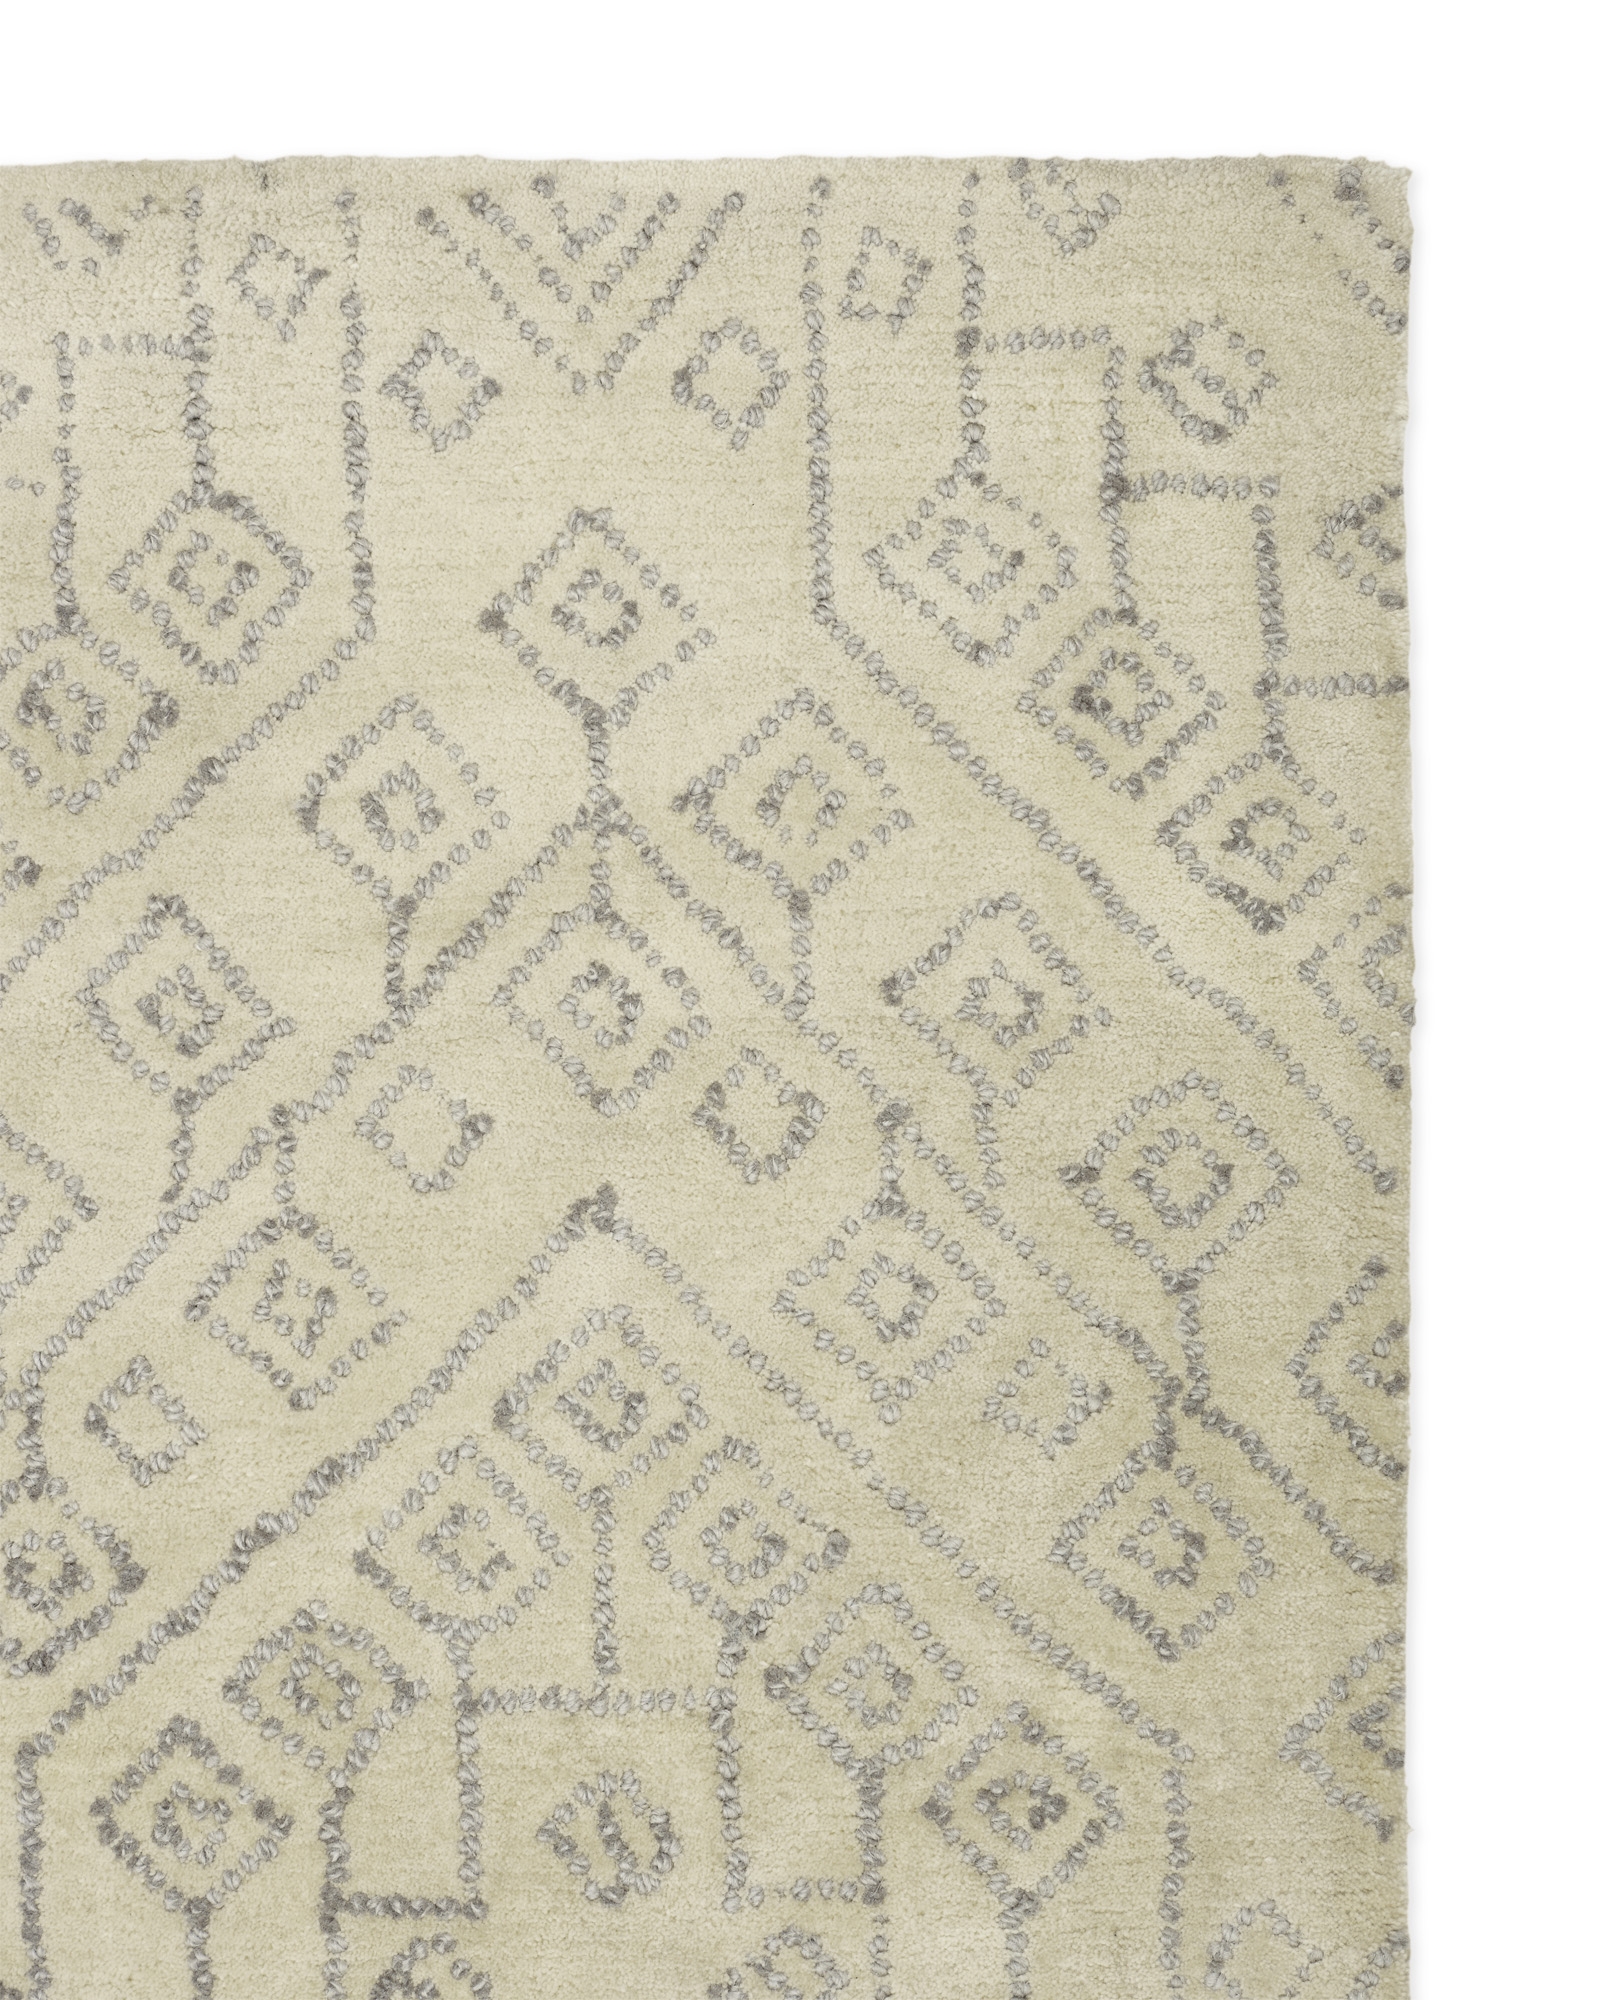 Plymouth Rug - Ivory - 9' x 12' - Image 1